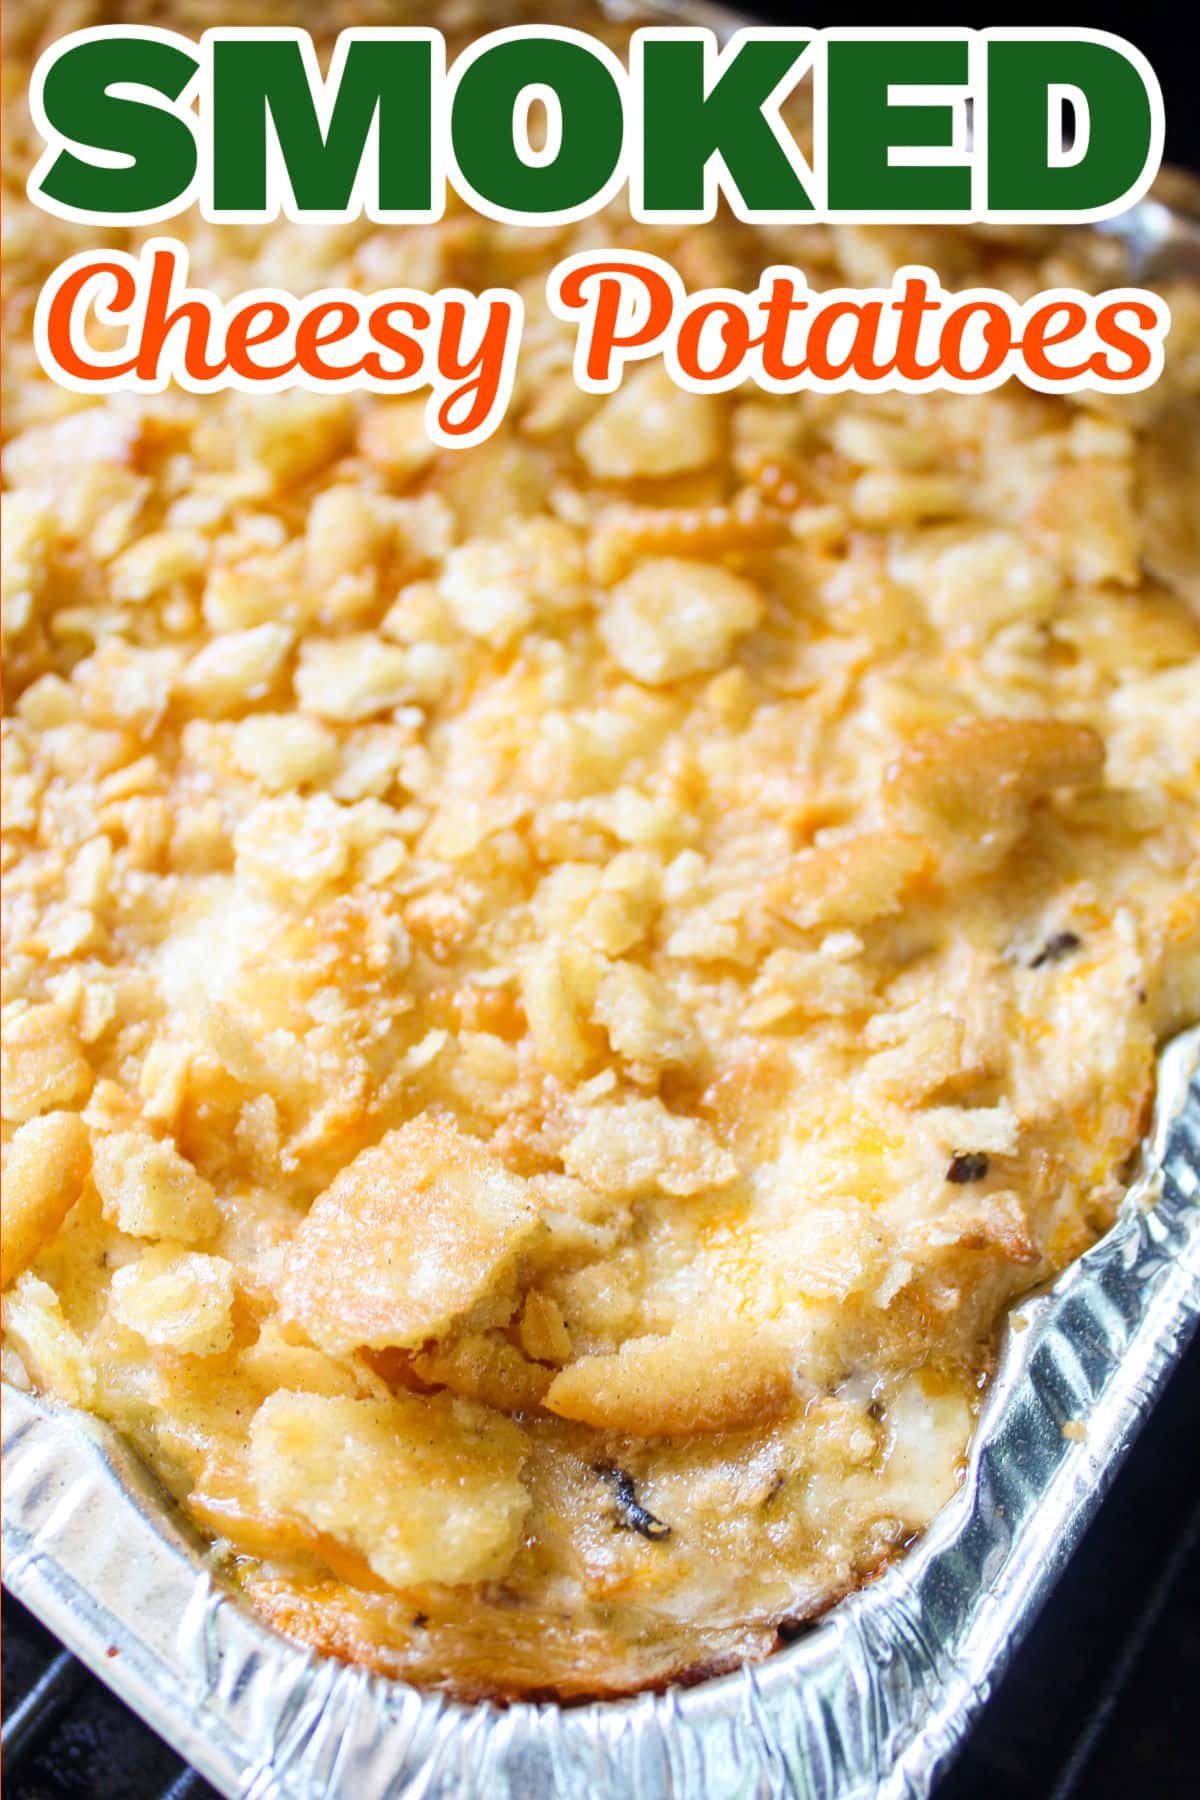 Traeger Smoked Cheesy Potatoes are the perfect side dish for any family meal. Cheesy Potatoes are easy to make and loaded with frozen hash browns, two kinds of shredded cheese, sour cream, diced onion (for a little crunch) and more!  via @foodhussy